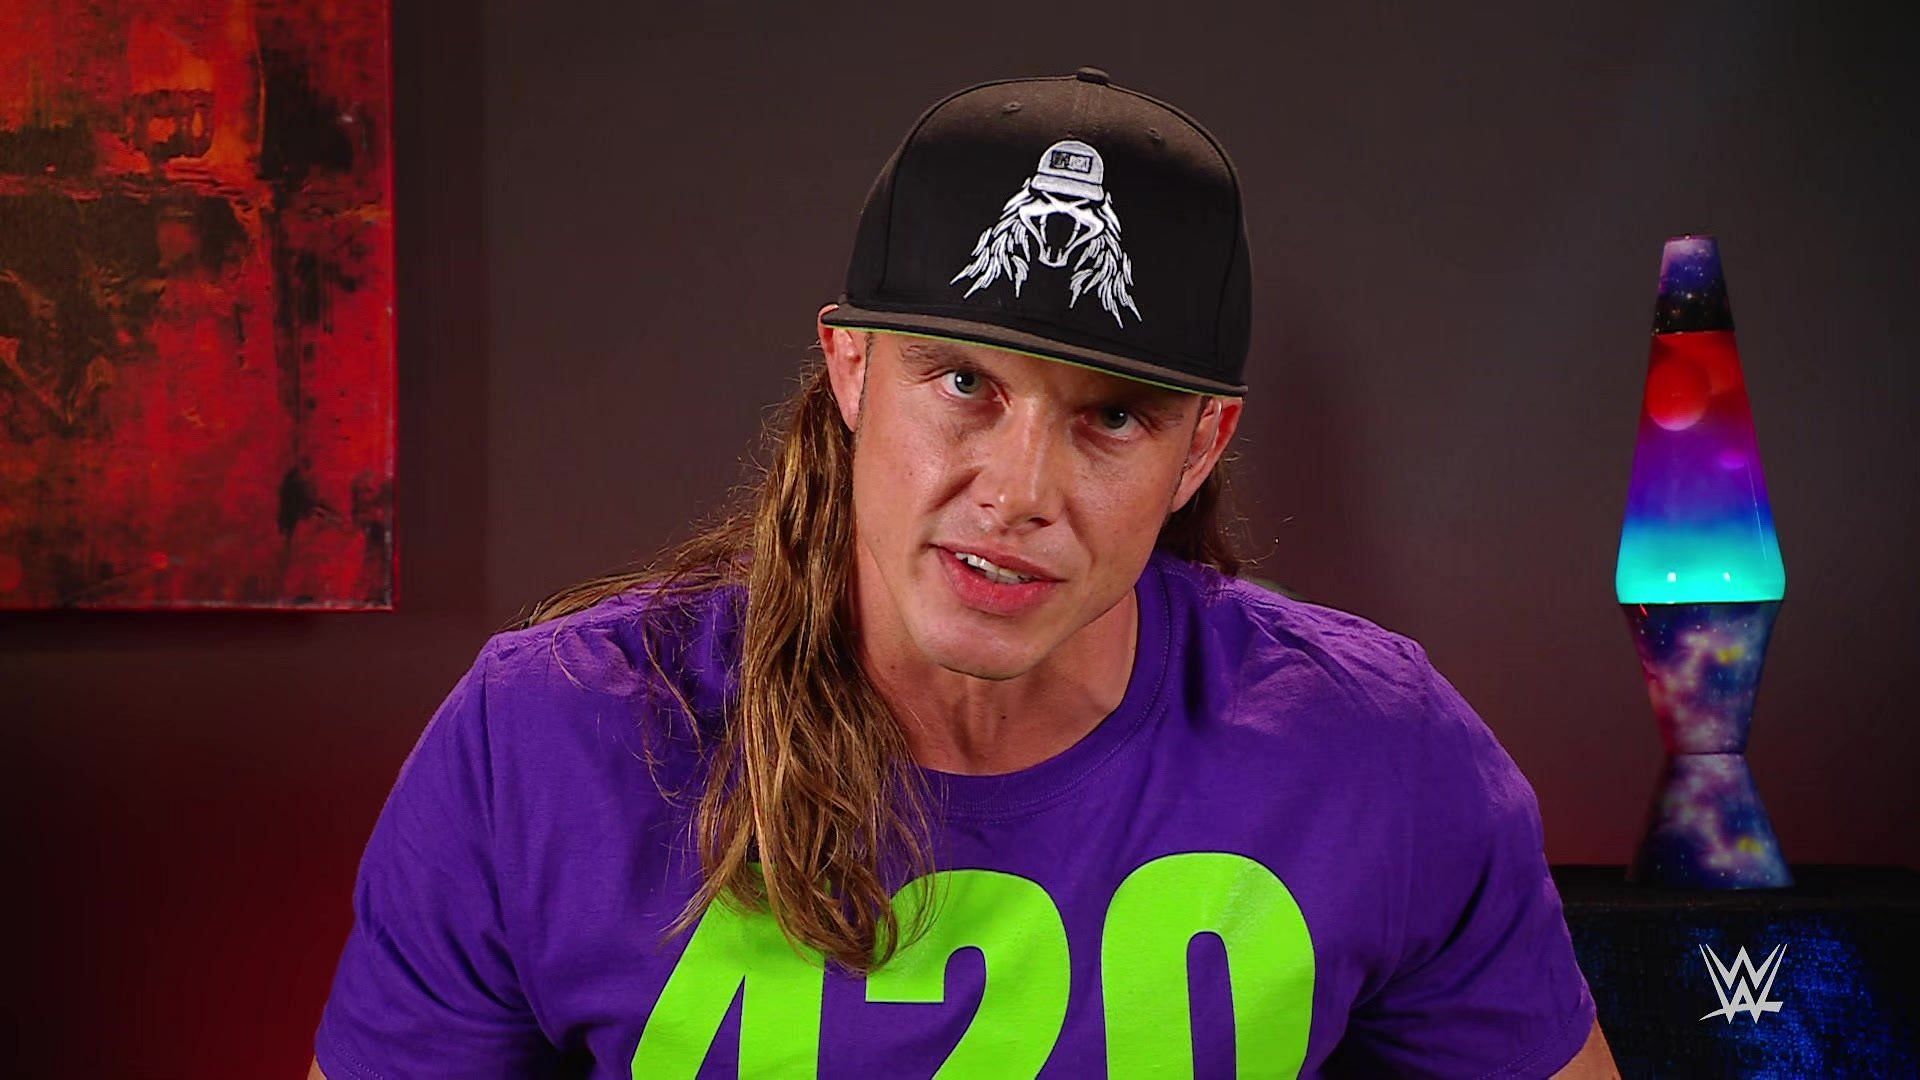 Matt Riddle is a former United States Champion 